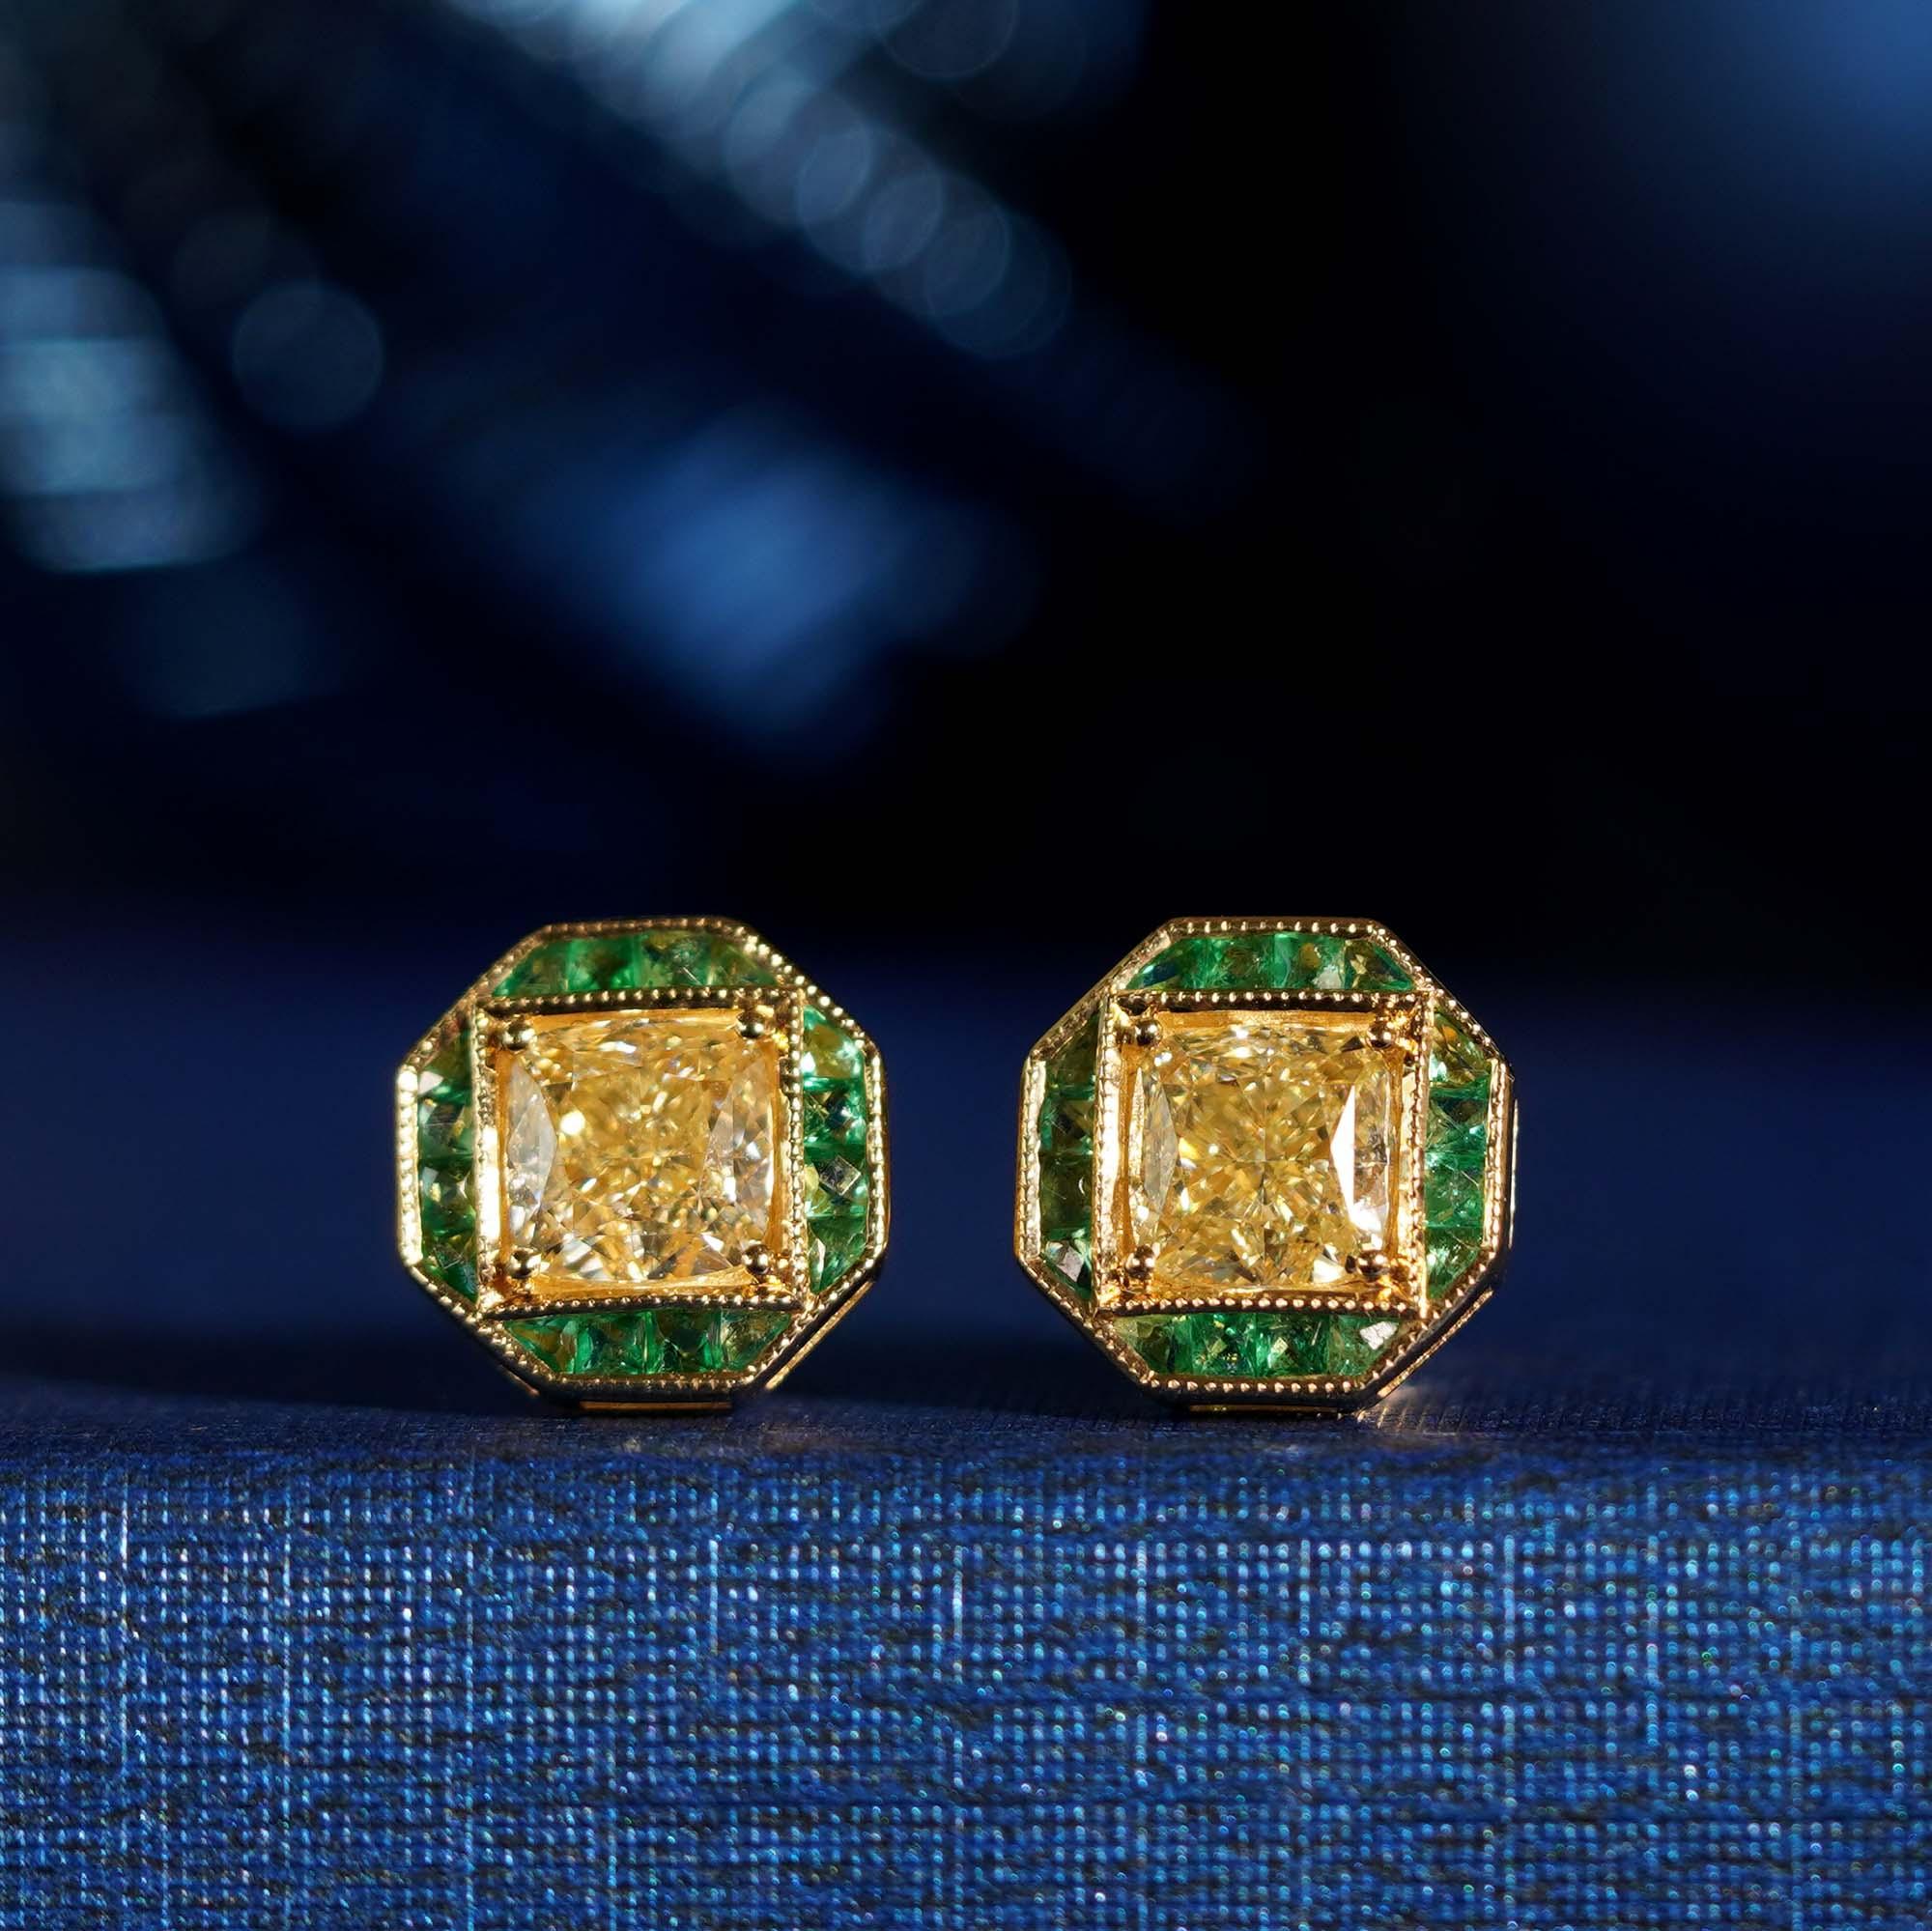 A spectacular pair of diamond and emerald stud earrings featuring total of 1.42 carat GIA certified diamonds and French cut emeralds secured in a statement bezel setting.

Earrings Information
Metal: 18K Yellow Gold
Width: 9 mm.
Length: 9